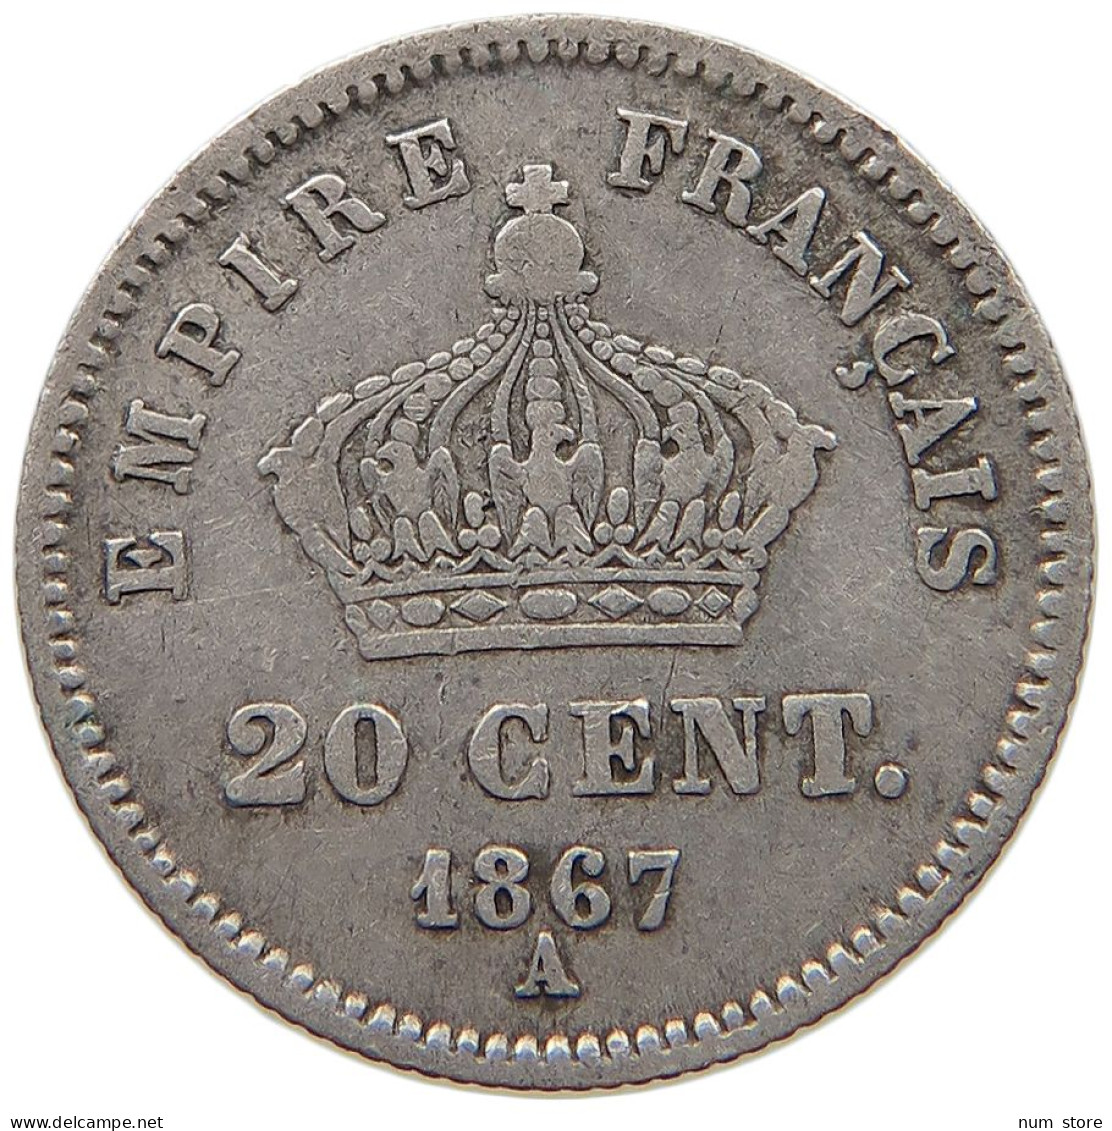 FRANCE 20 CENTIMES 1867 A Napoleon III. (1852-1870) #c058 0299 - 20 Centimes